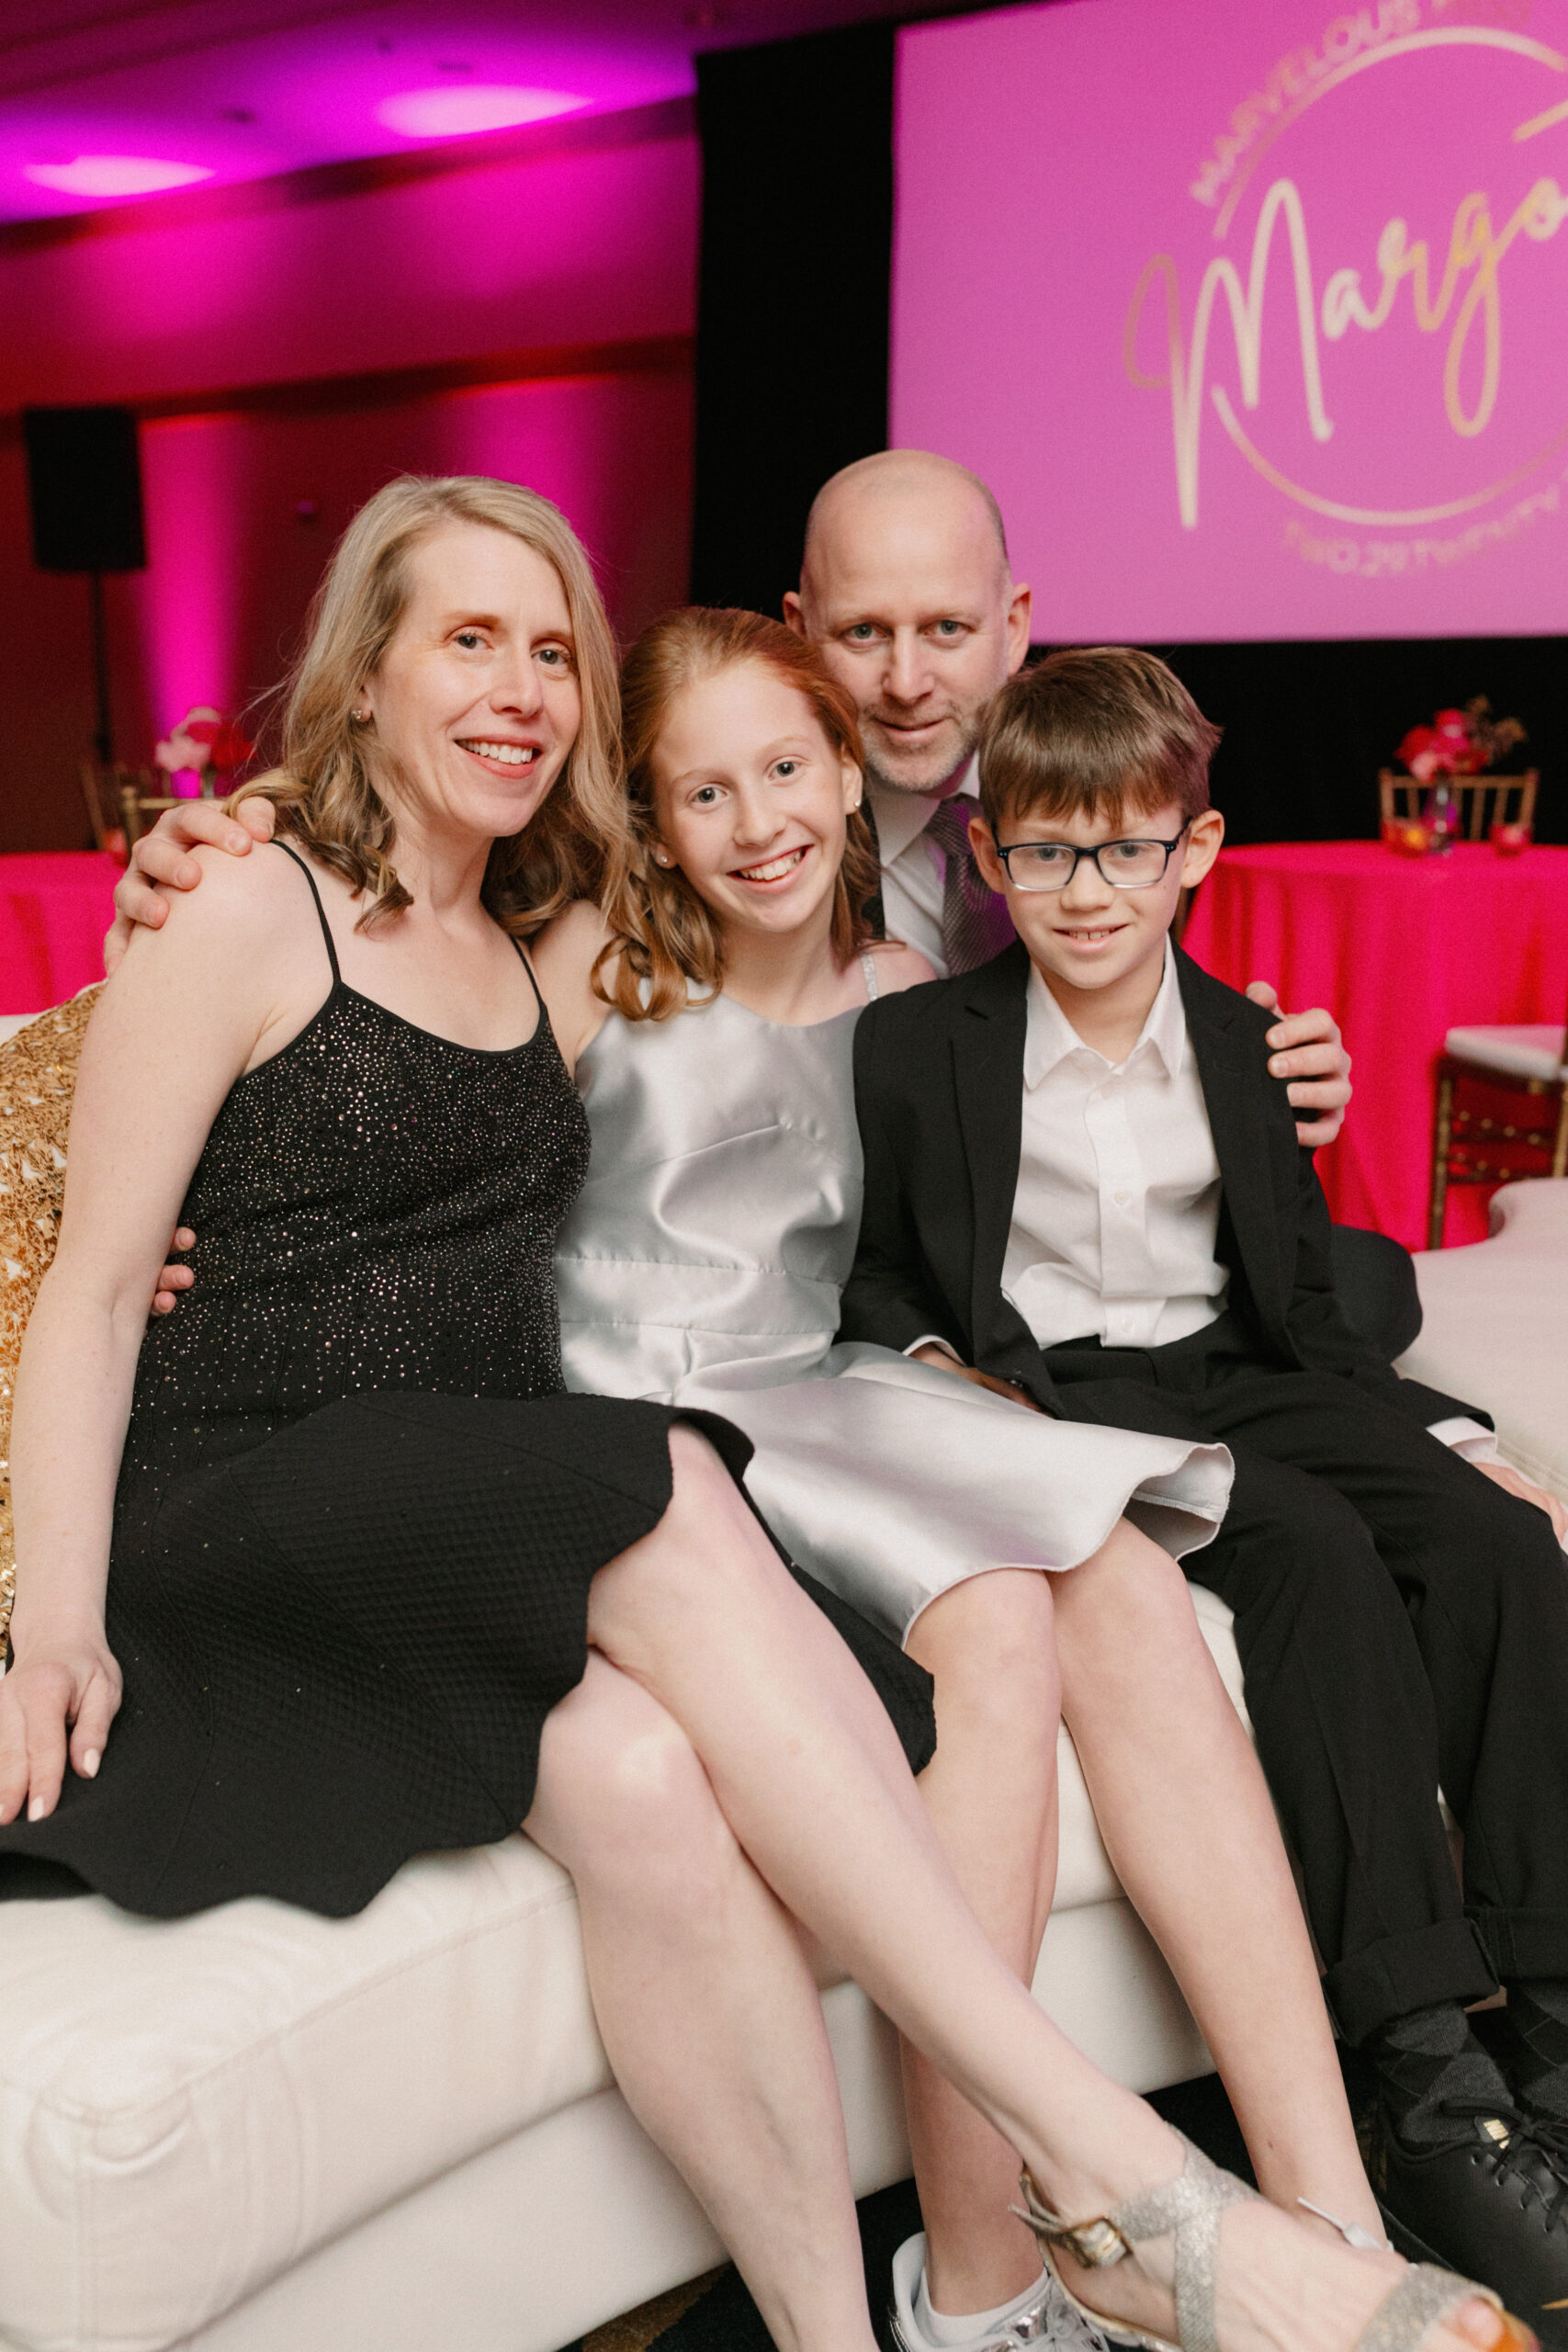 A family posing for formal portraits during a bat mitzvah celebration at the Mac Club in Portland.